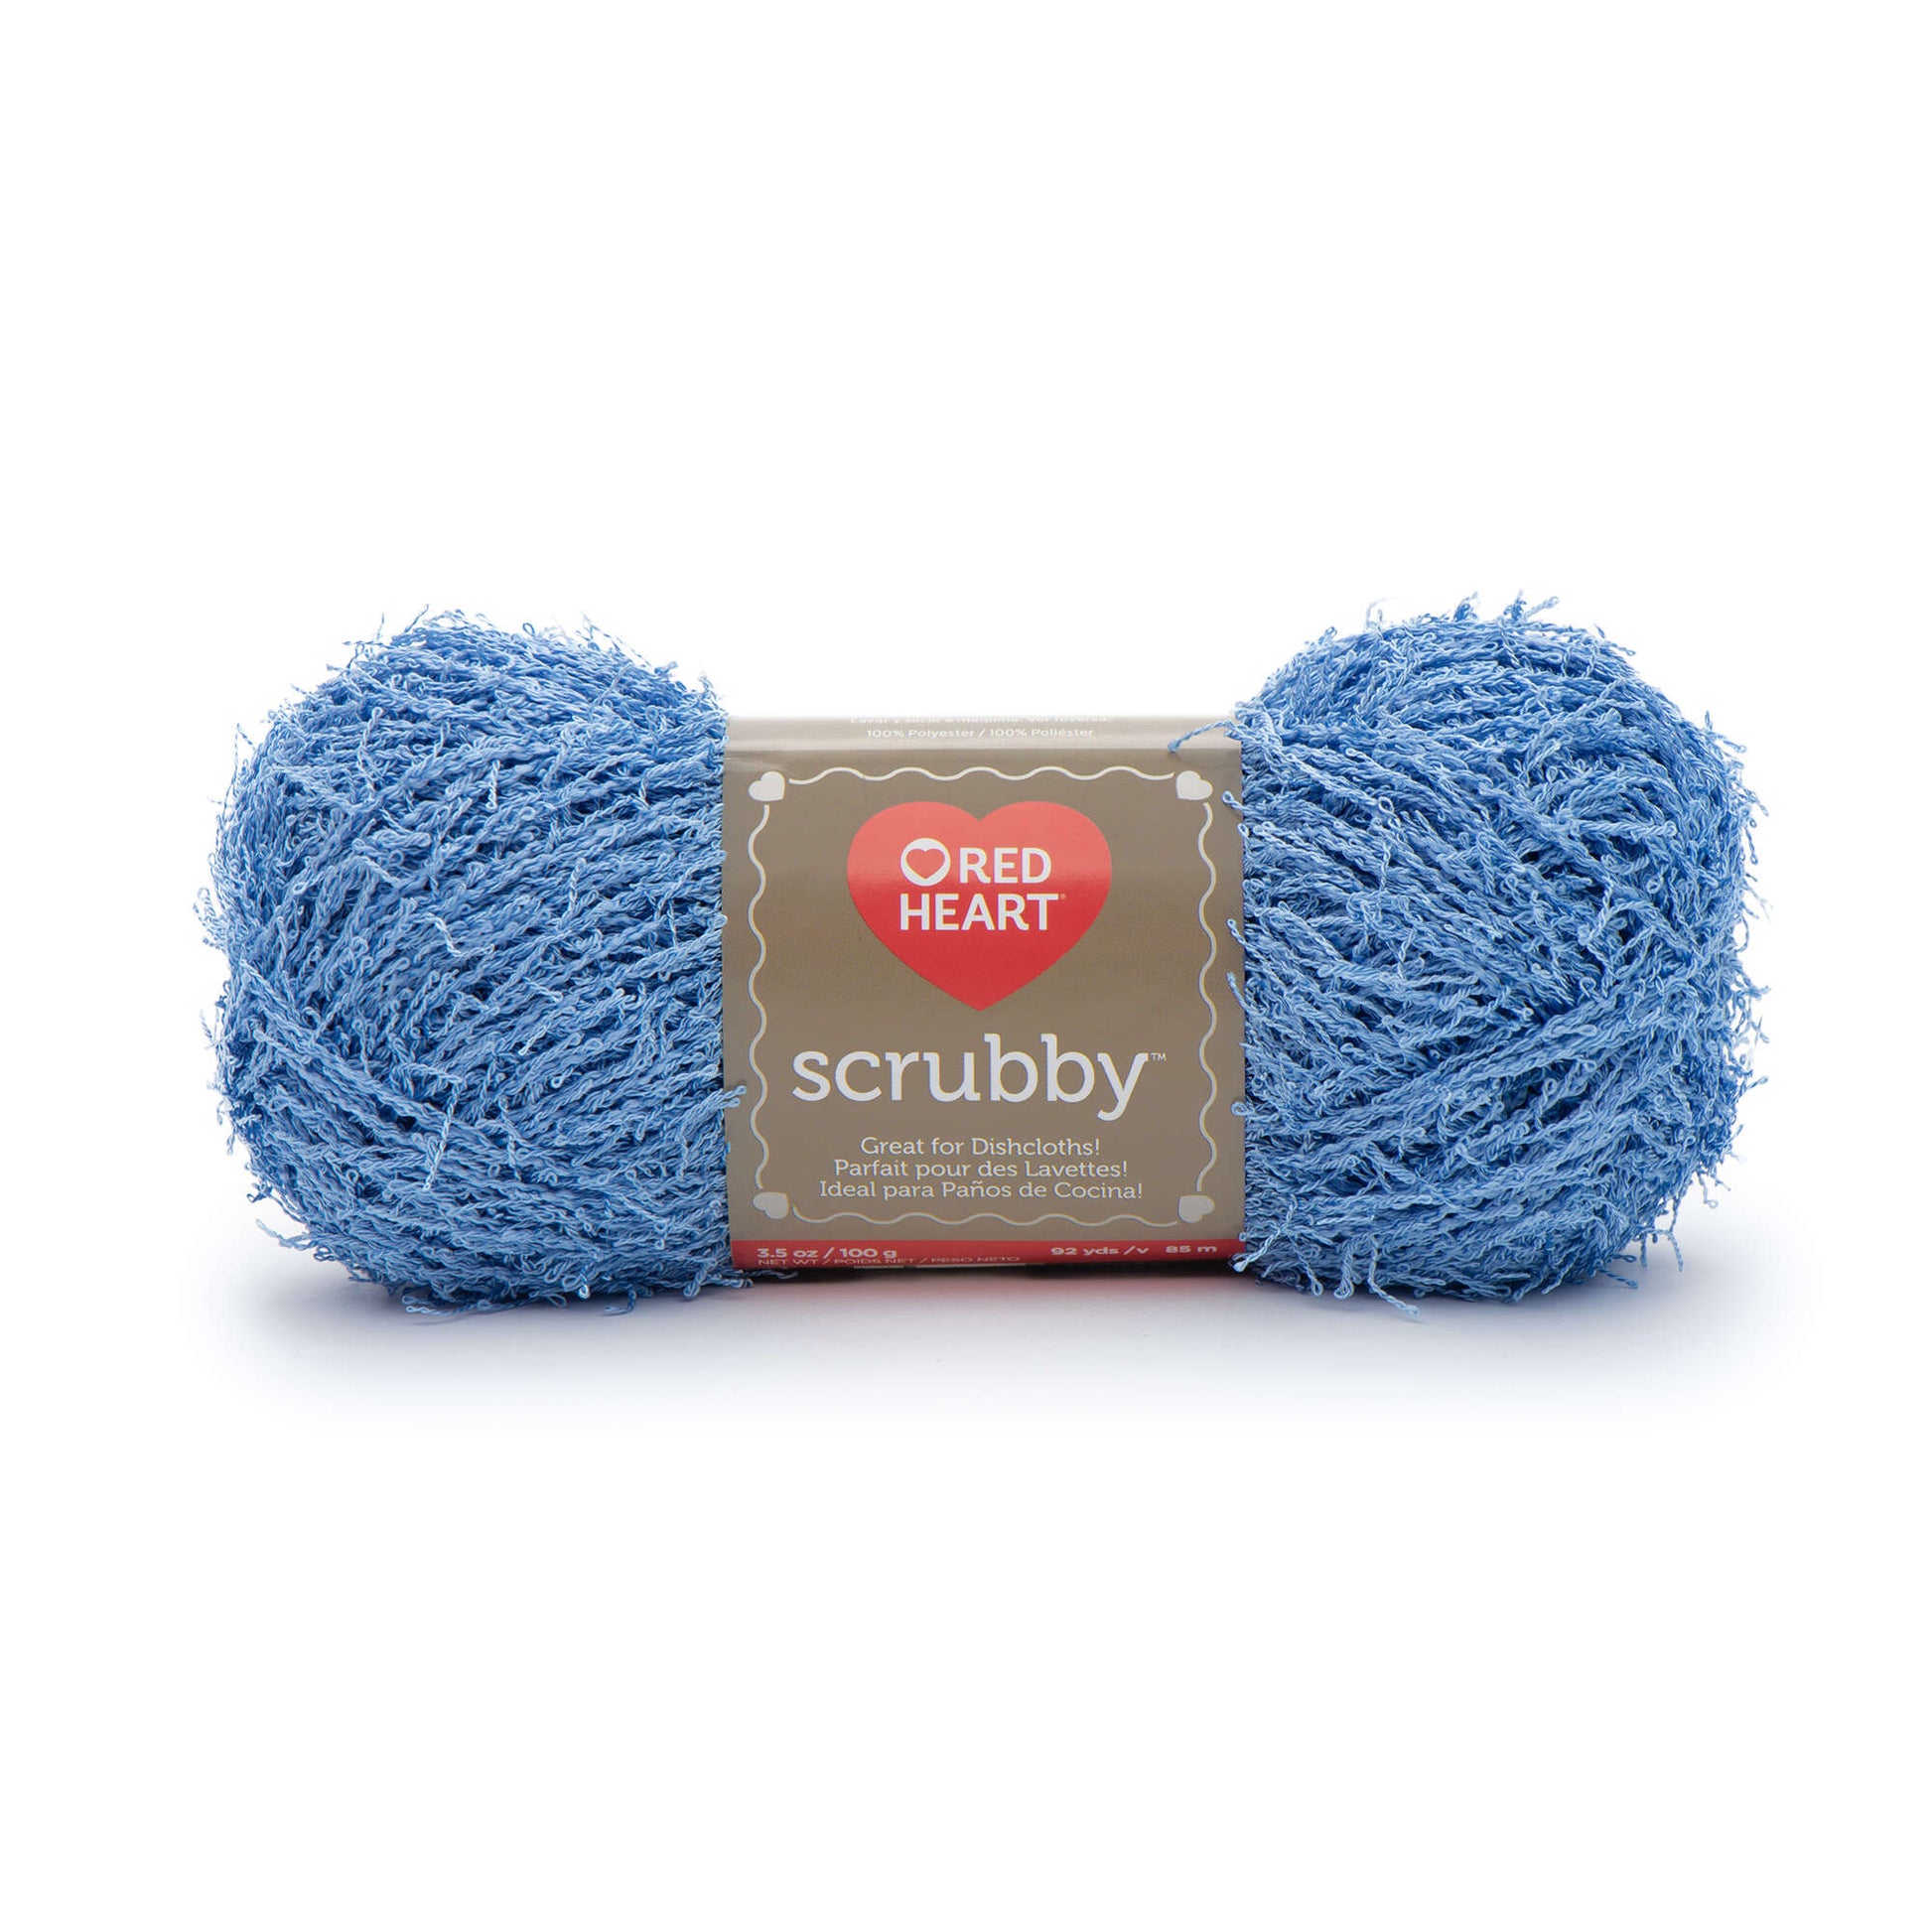 Red Heart Scrubby Yarn 100% polyester 3.5 oz 92 yds. Waves multi-blue NEW